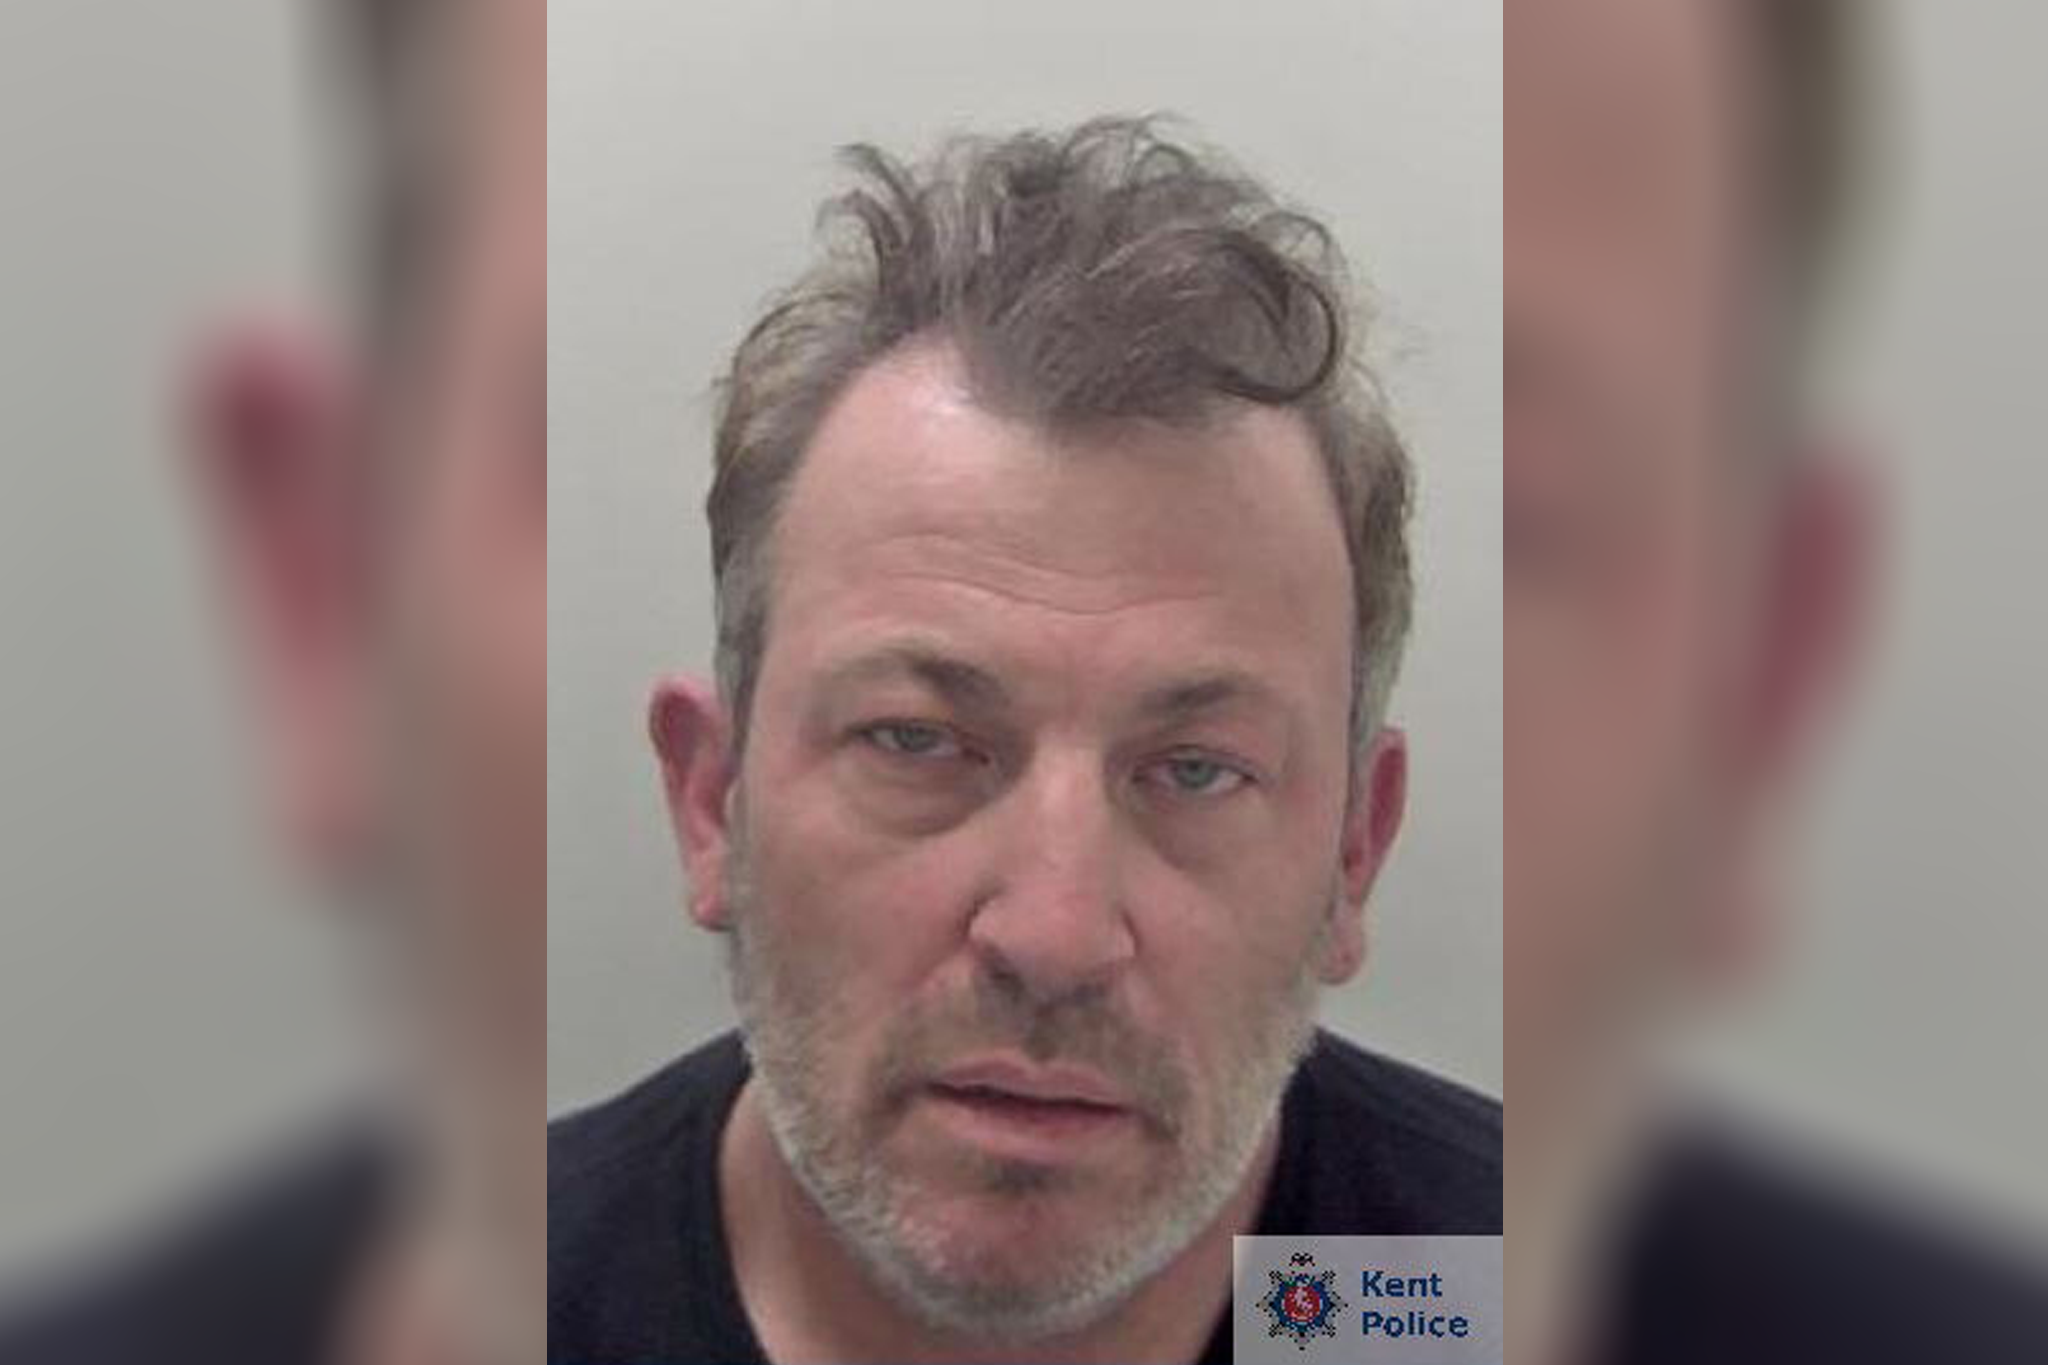 The 50-year-old was jailed for 12 years at Maidstone Crown Court